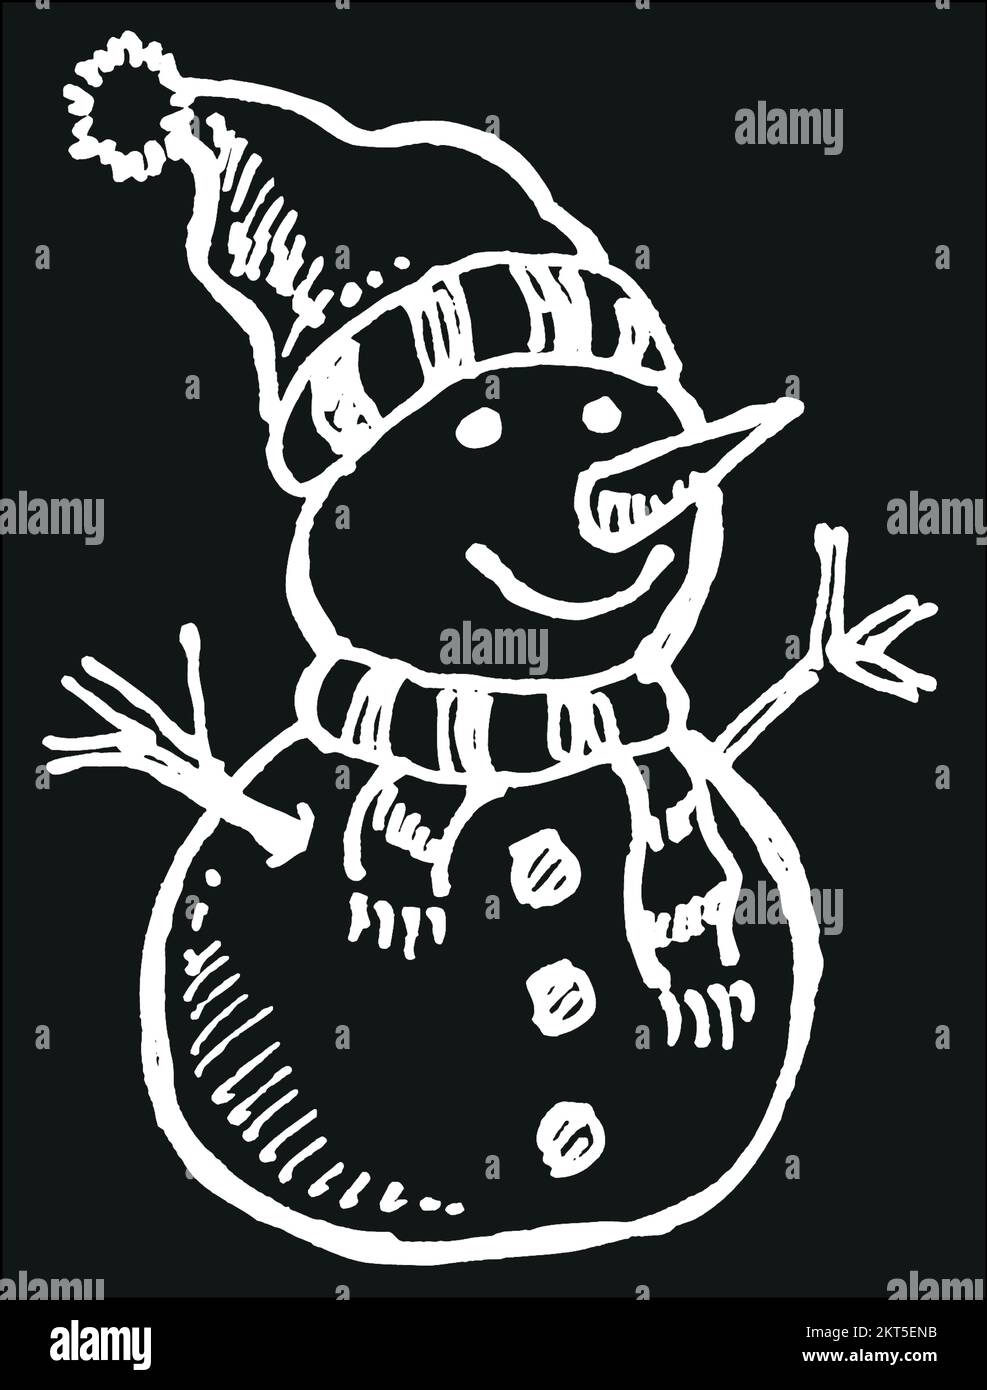 Snowman freehand drawn Stock Vector